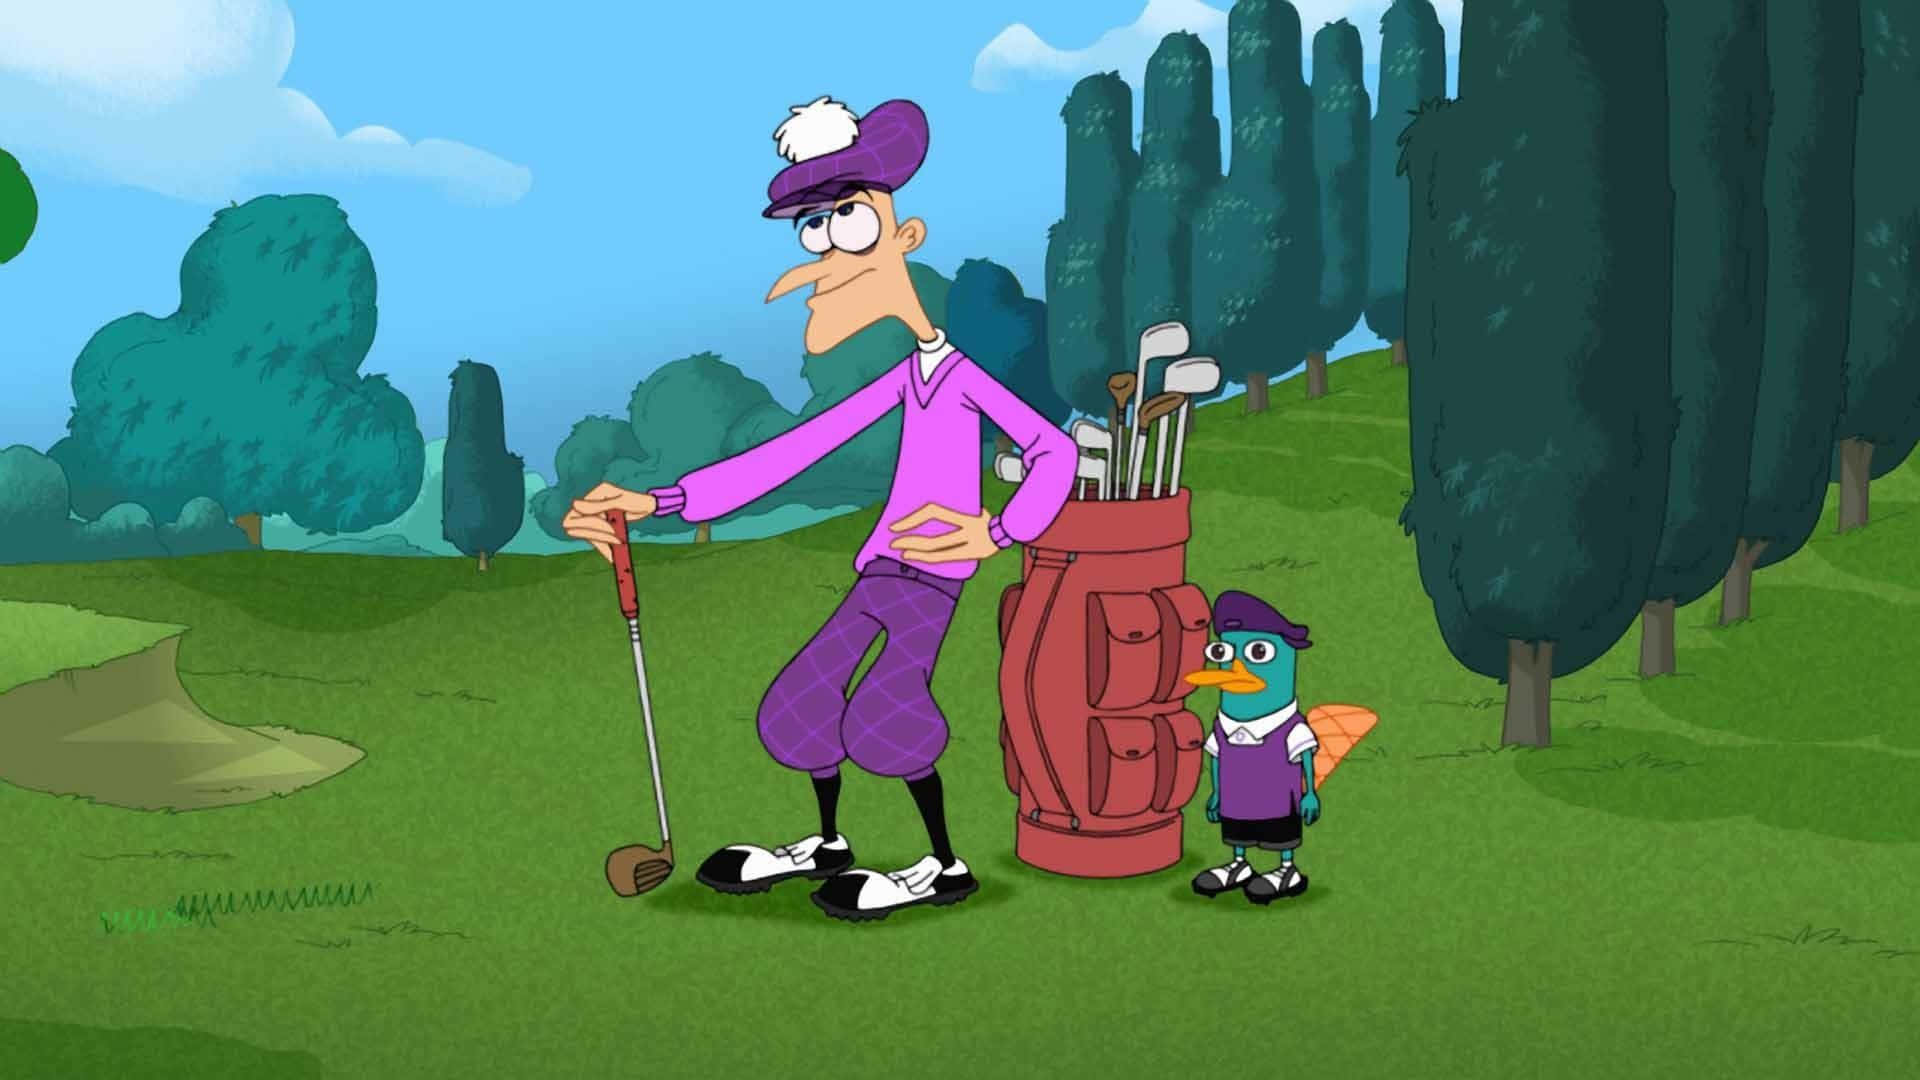 Phineas and Ferb surrounded by their friends in a colorful background